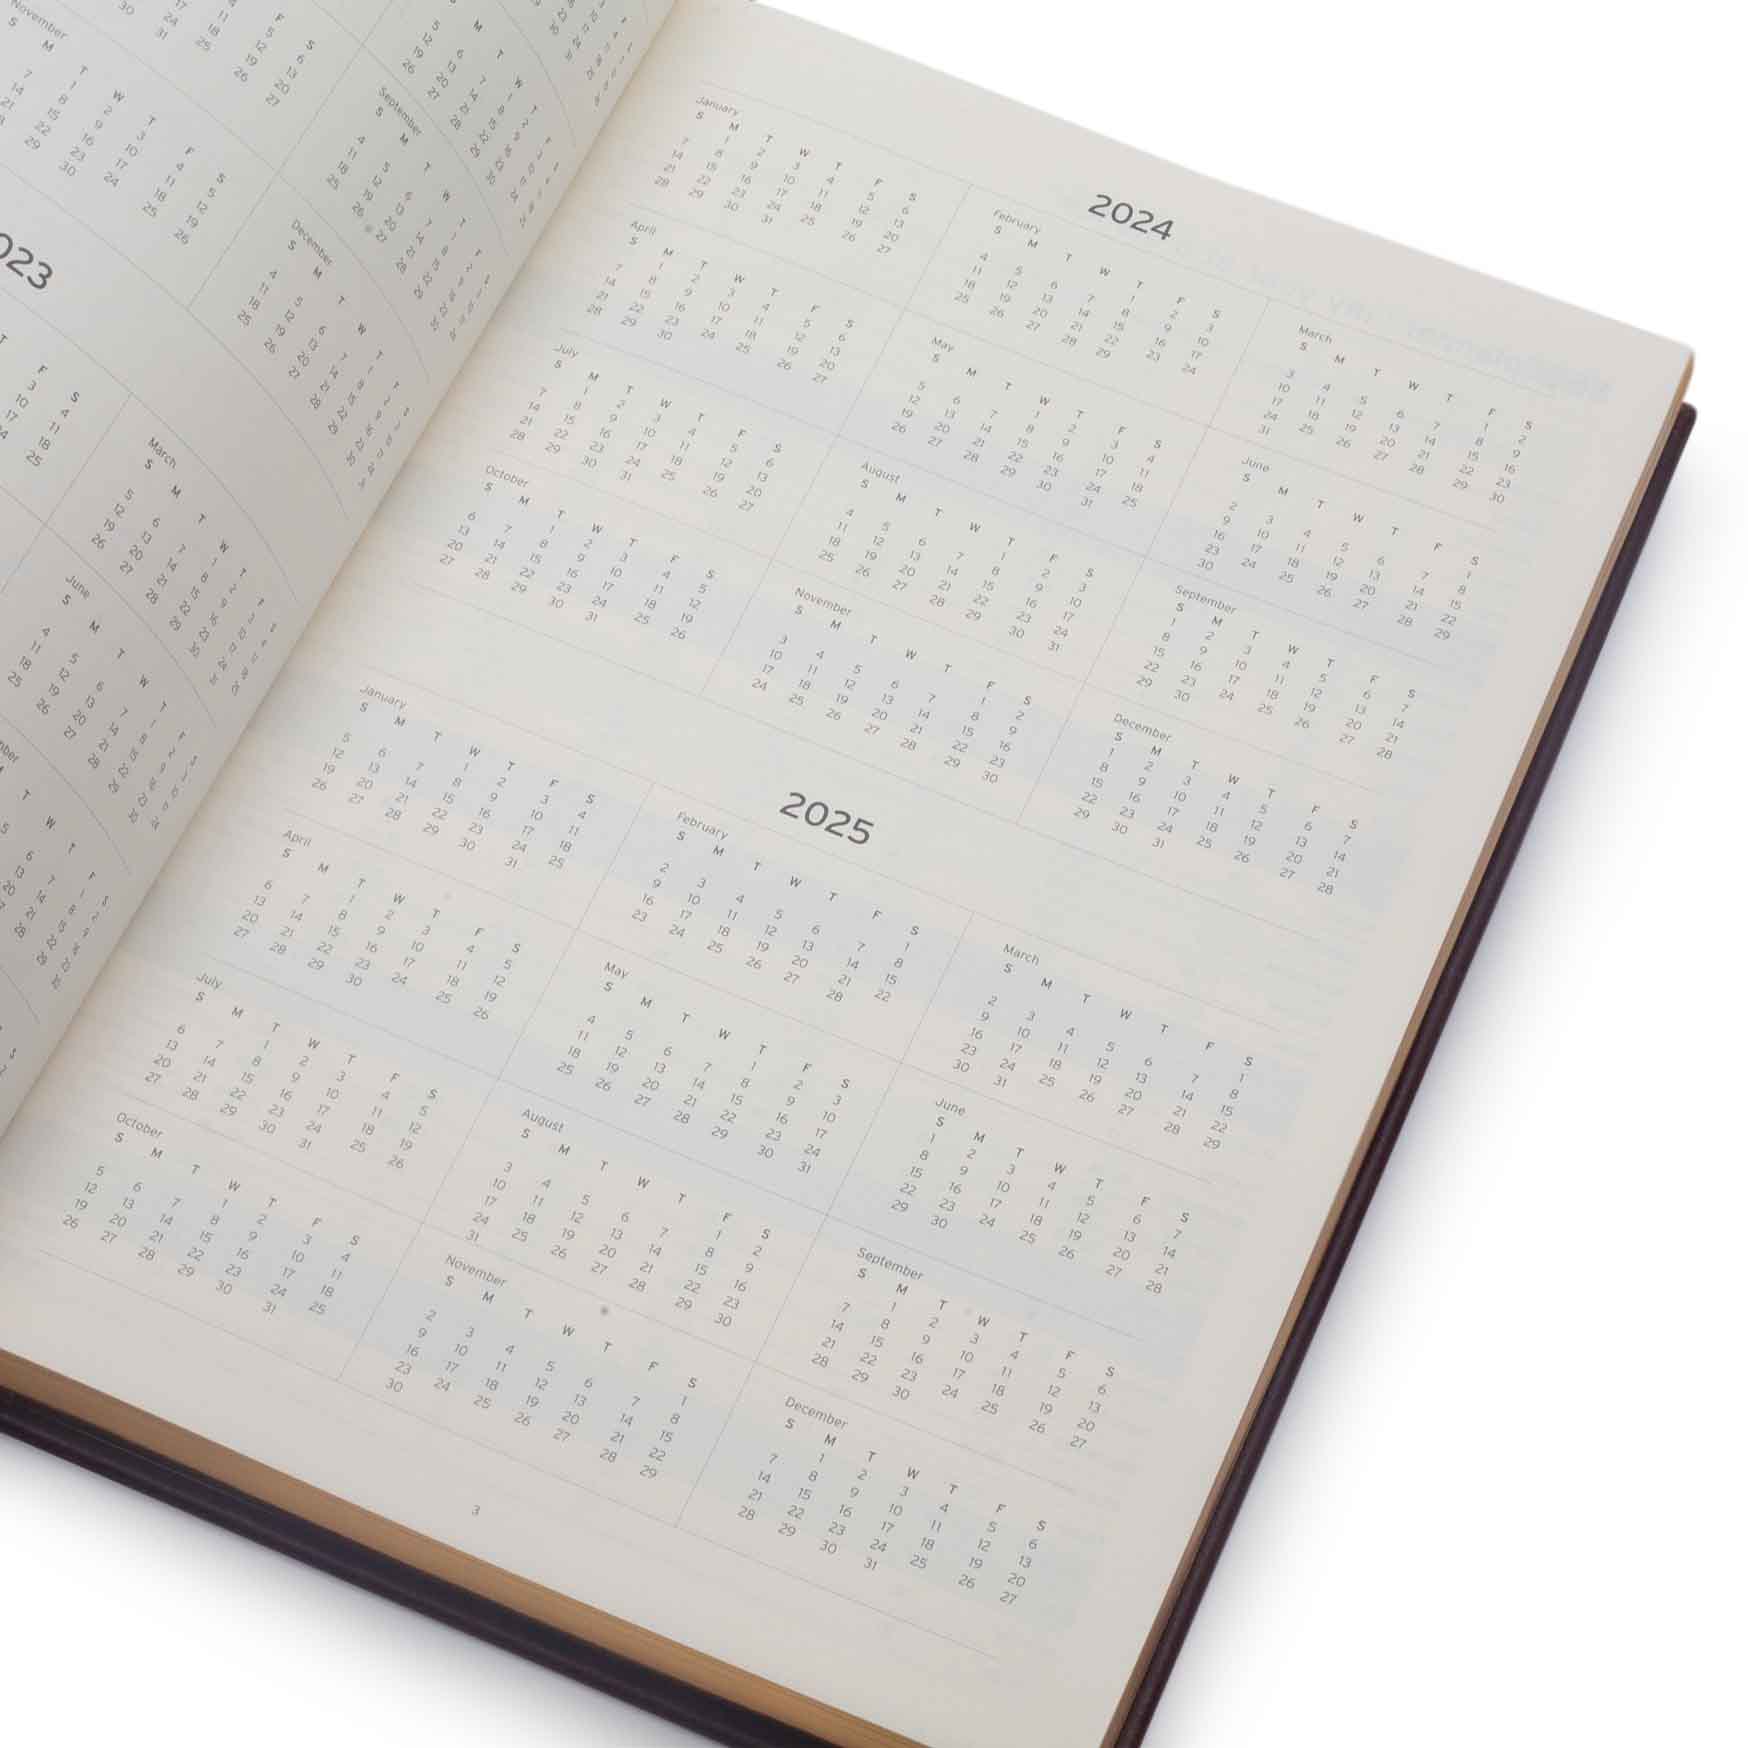 Image shows the yearly calendar page in the Rustik Mauriati Planner